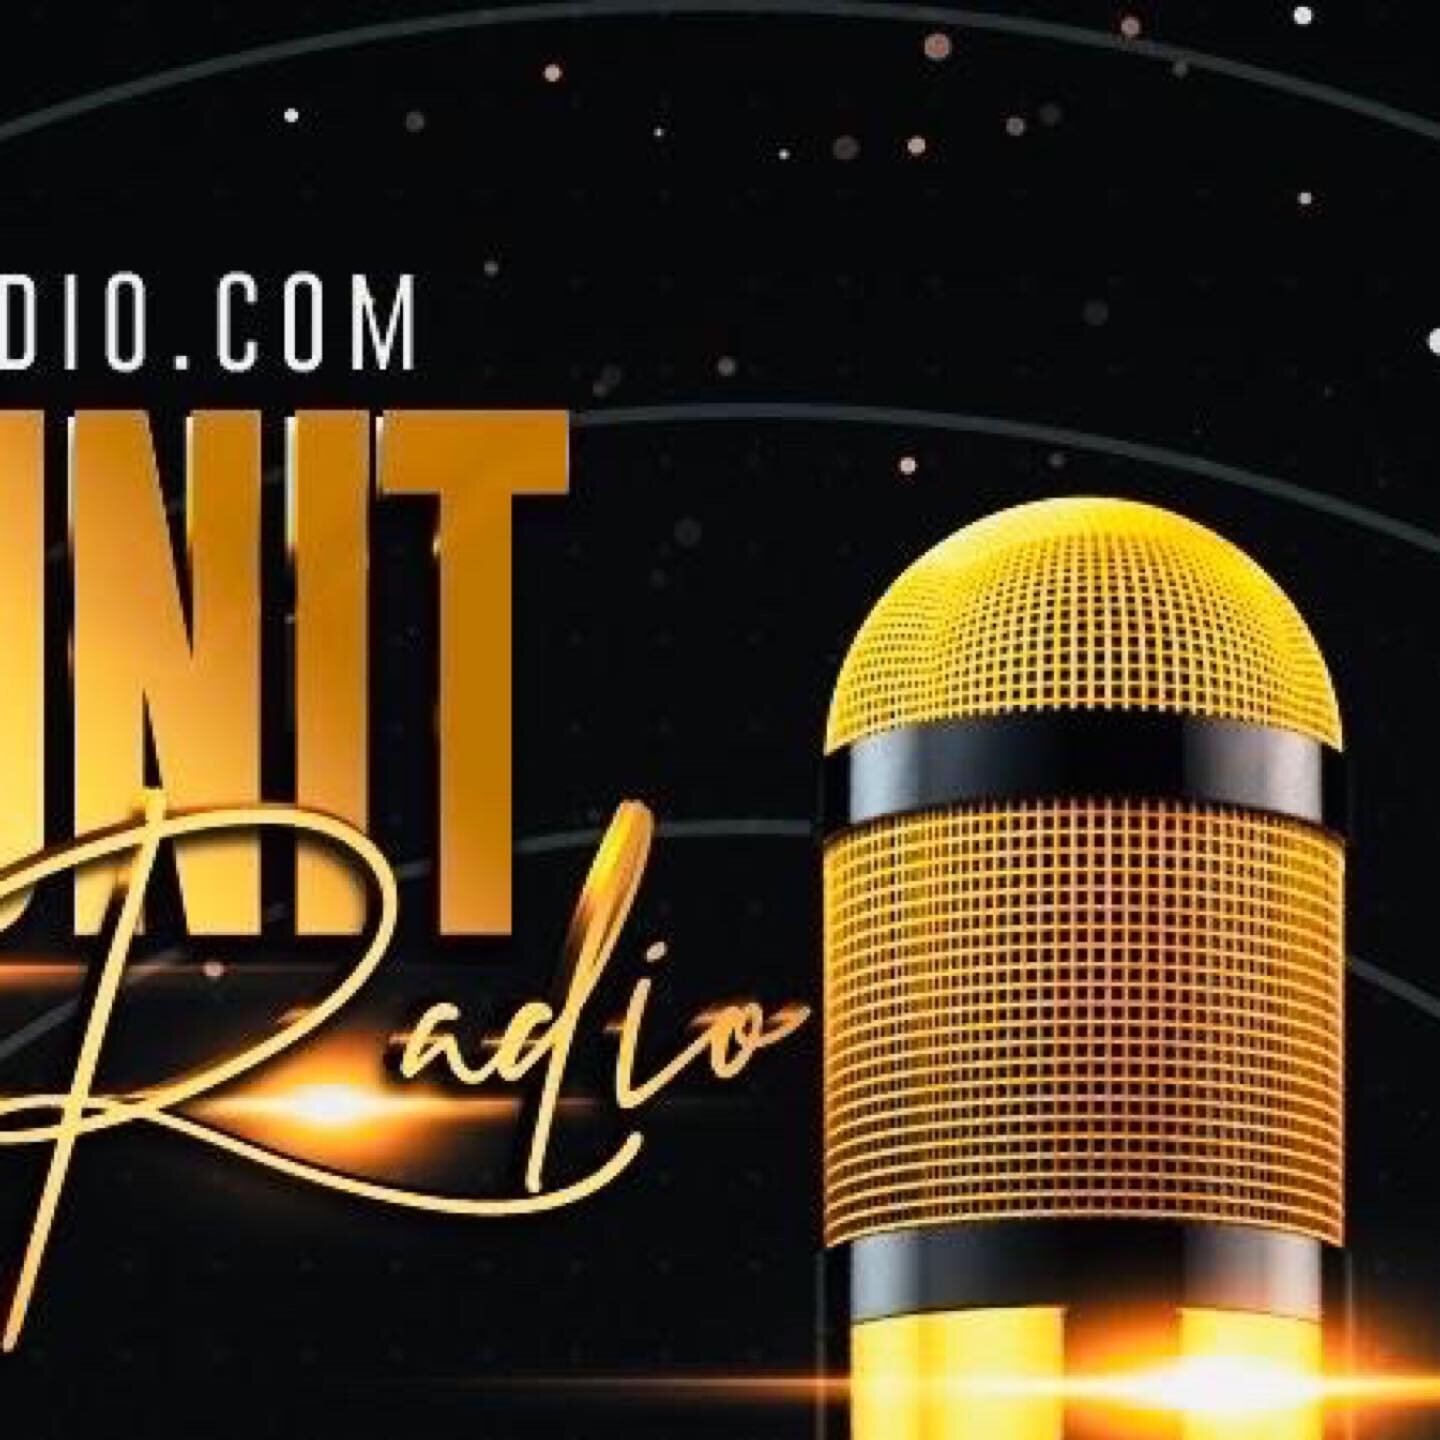 Get real familiar!!!
.
@soundunitradio is taking it to a whole new level! All new #podcasts / #talkshows &amp; #DJs #Everyday!!!
.
@thewowcast 
@cqnetwork 
@theeyardieboyz 
@thepourcast 
@thepinksituationroom 
@theabroaddj 
@blendwithus 
.
@carlitosw